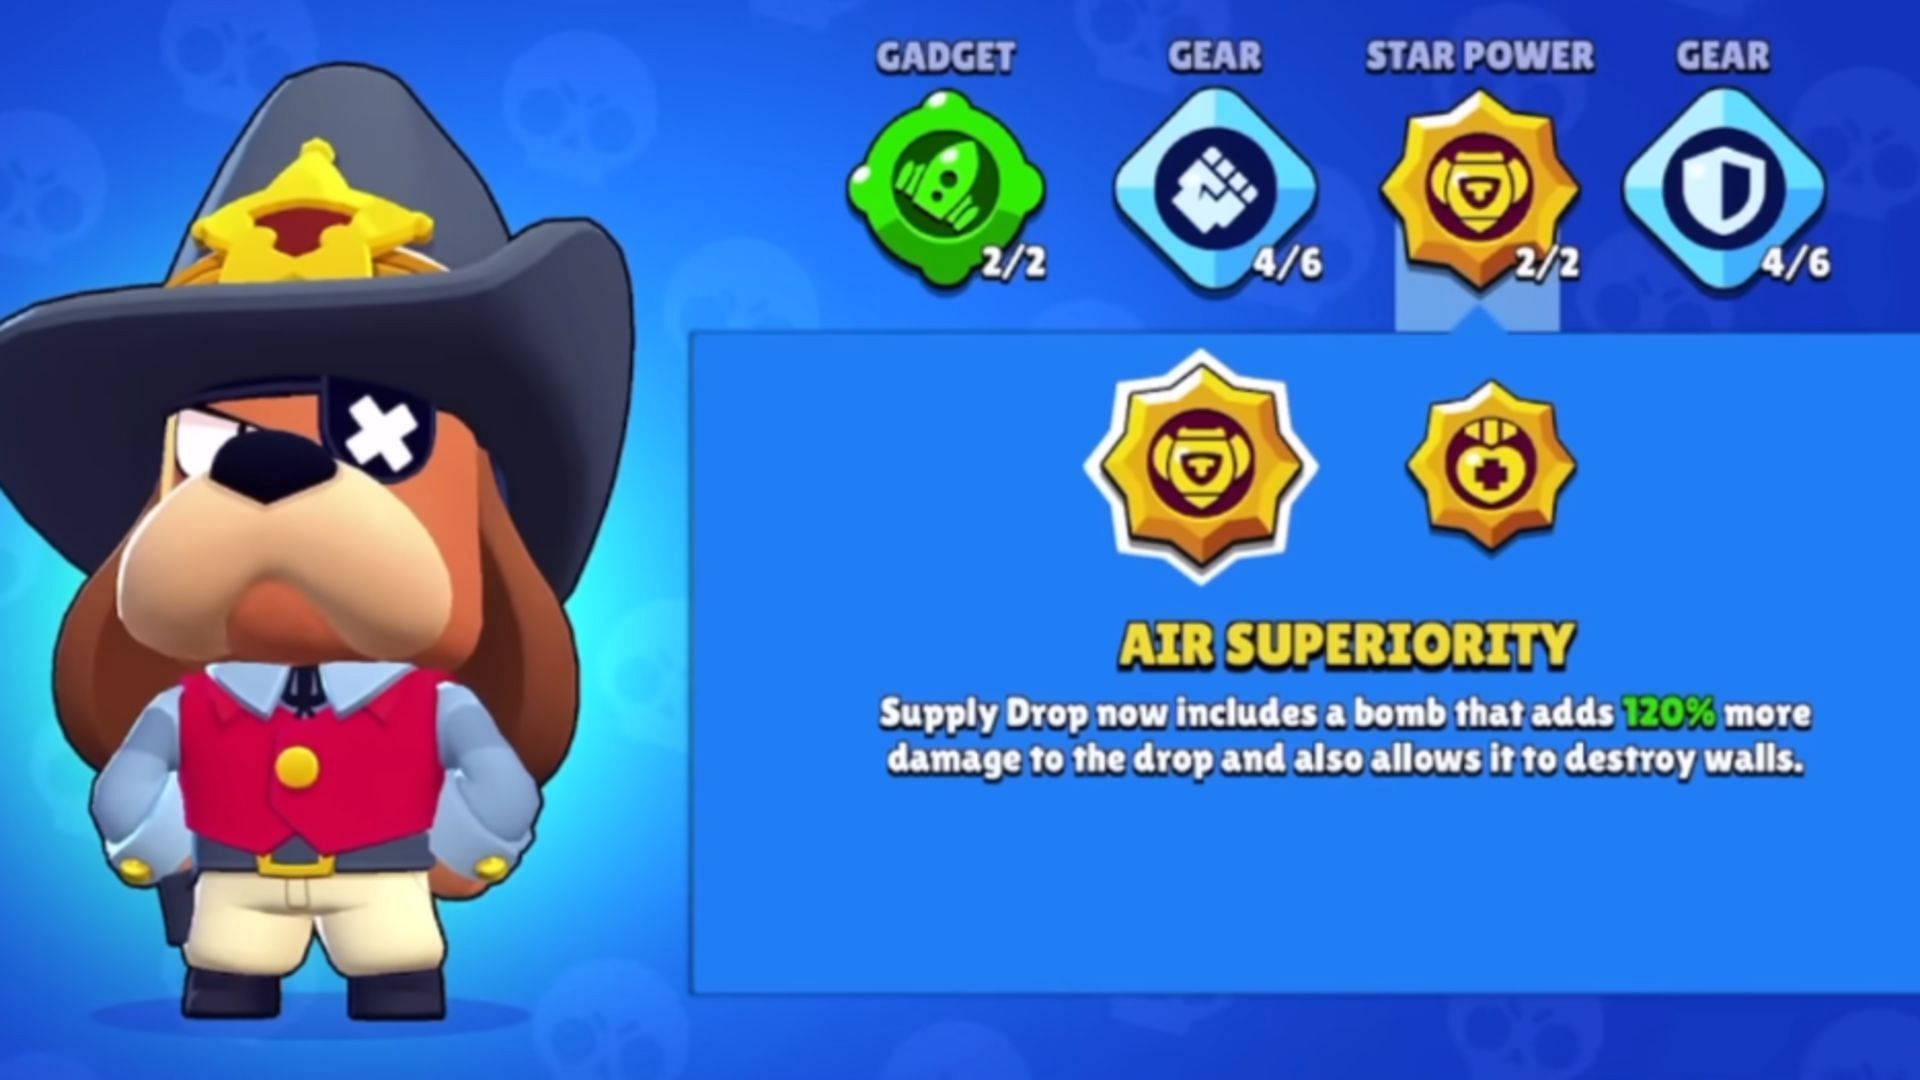 Air Superiority Star Power (Image via Supercell)